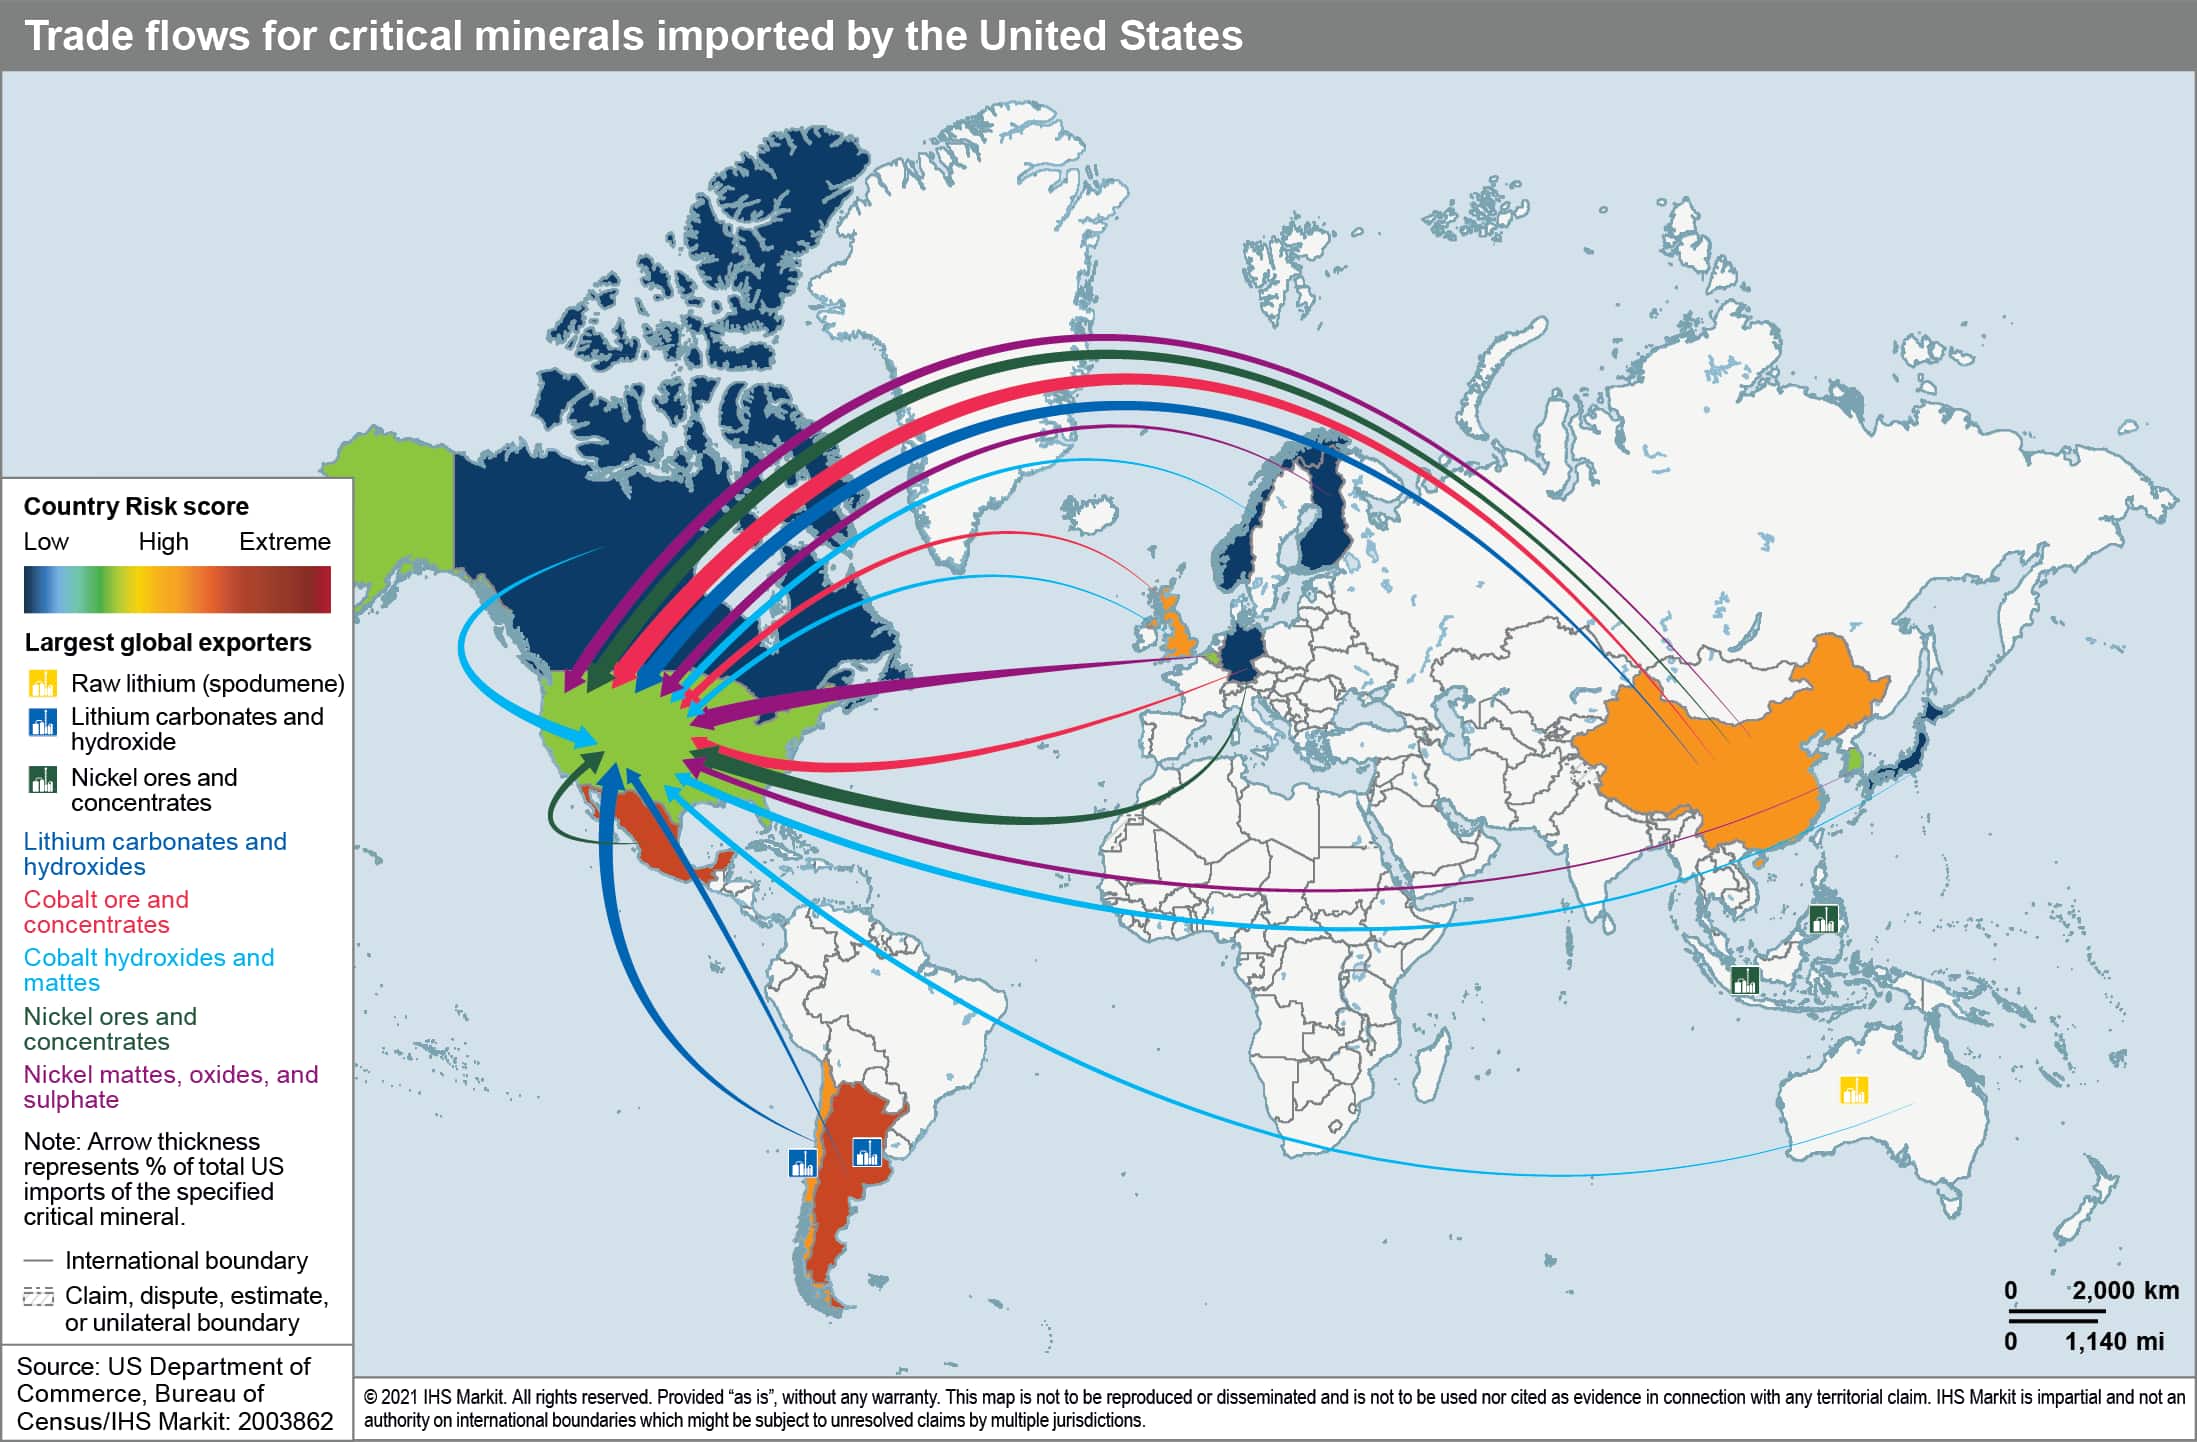 trade flows for critical minerals imported by the US